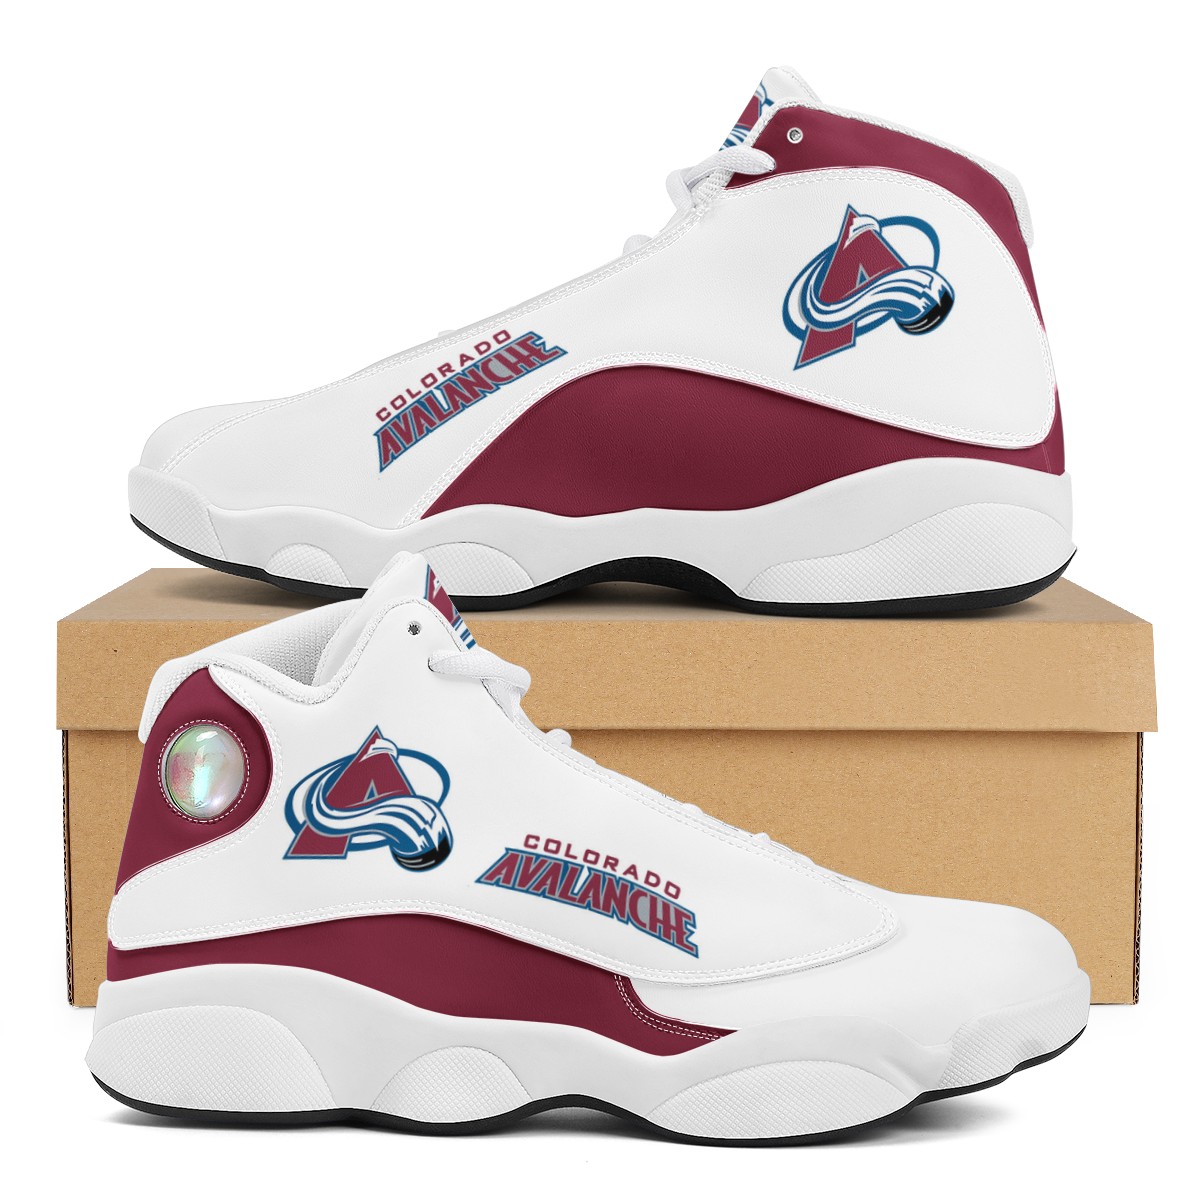 Men's Colorado Avalanche Limited Edition JD13 Sneakers 001